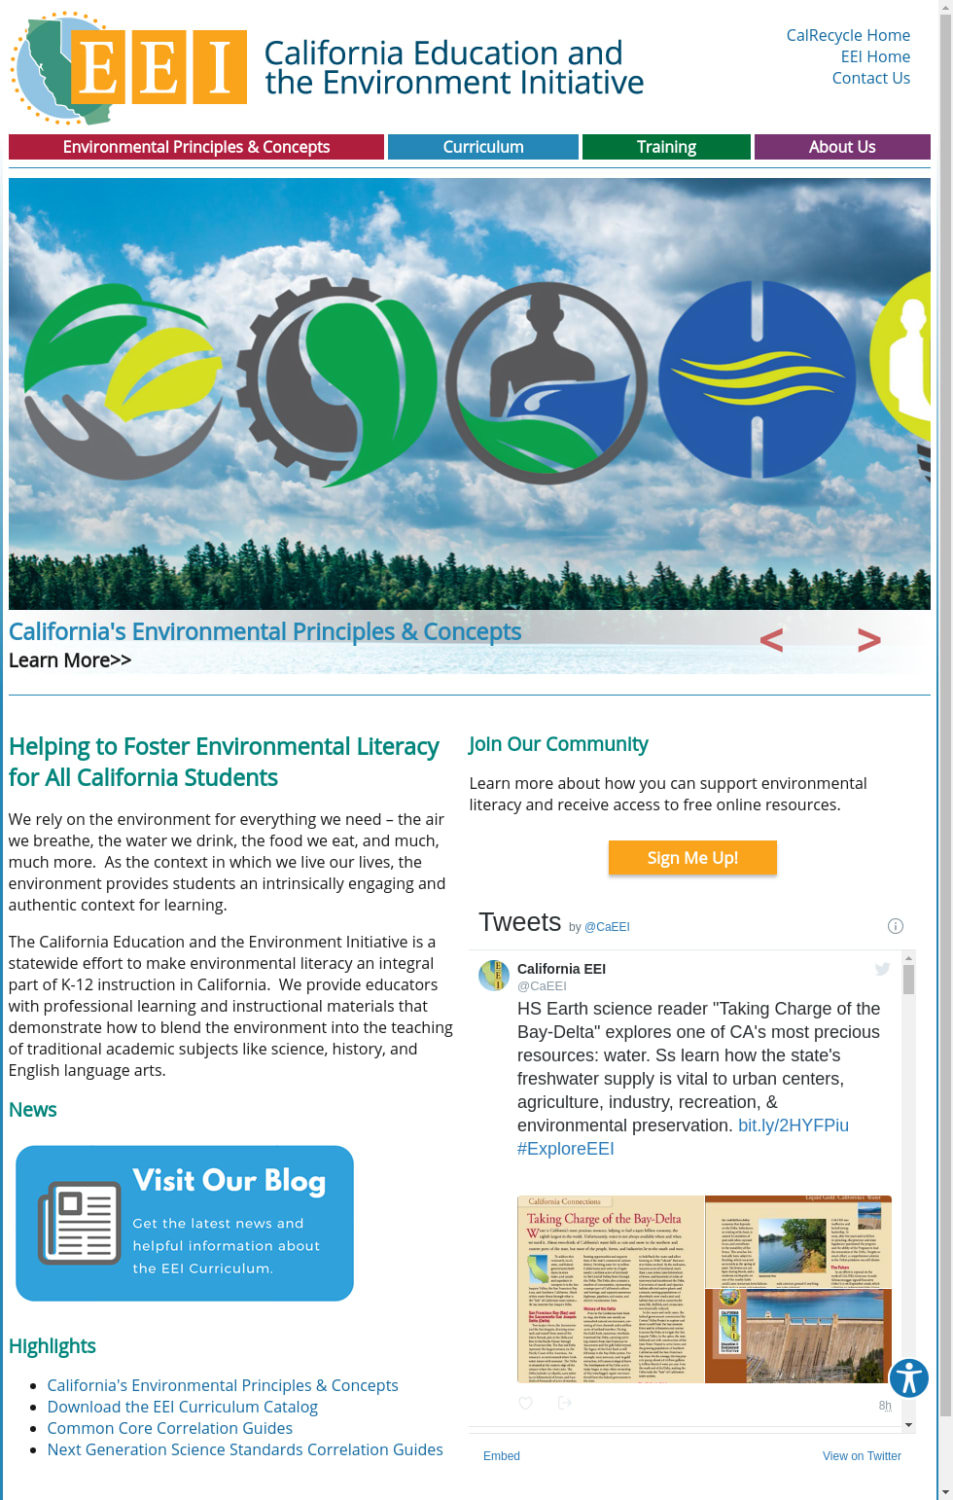 Home - California Education and the Environment Initiative (EEI)